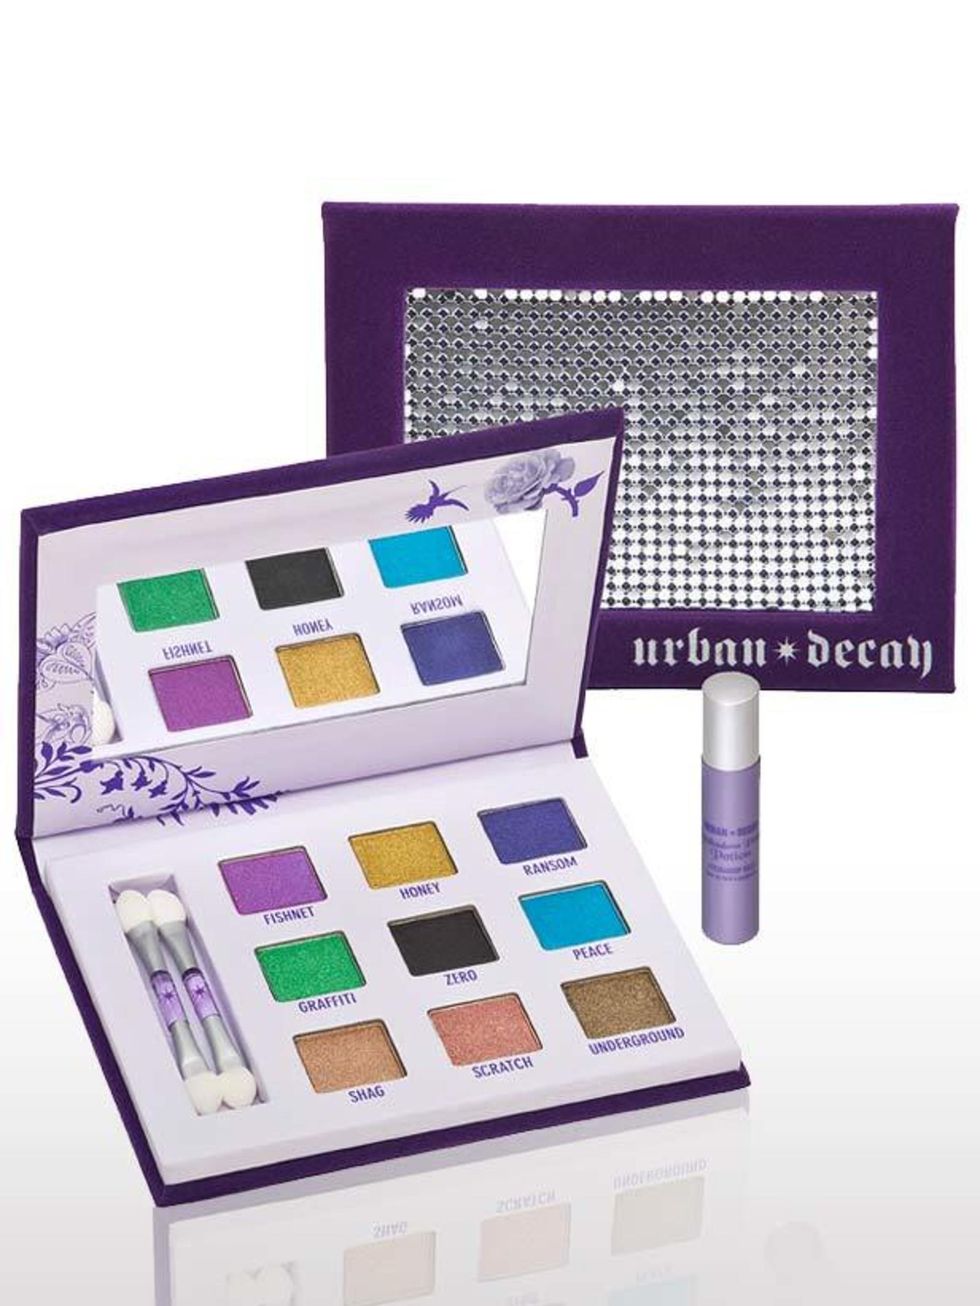 <p>Deluxe Shadow Box, £20 by Urban Decay at <a href="http://www.houseoffraser.co.uk/Urban%20Decay%20Deluxe%20Shadow%20Box/108219769,default,pd.html?cgid=10019&amp;cm_mmc=Affiliate-_-Linkshare-_-Linkbuilder-_-Null">House of Fraser</a></p><p>From the purple